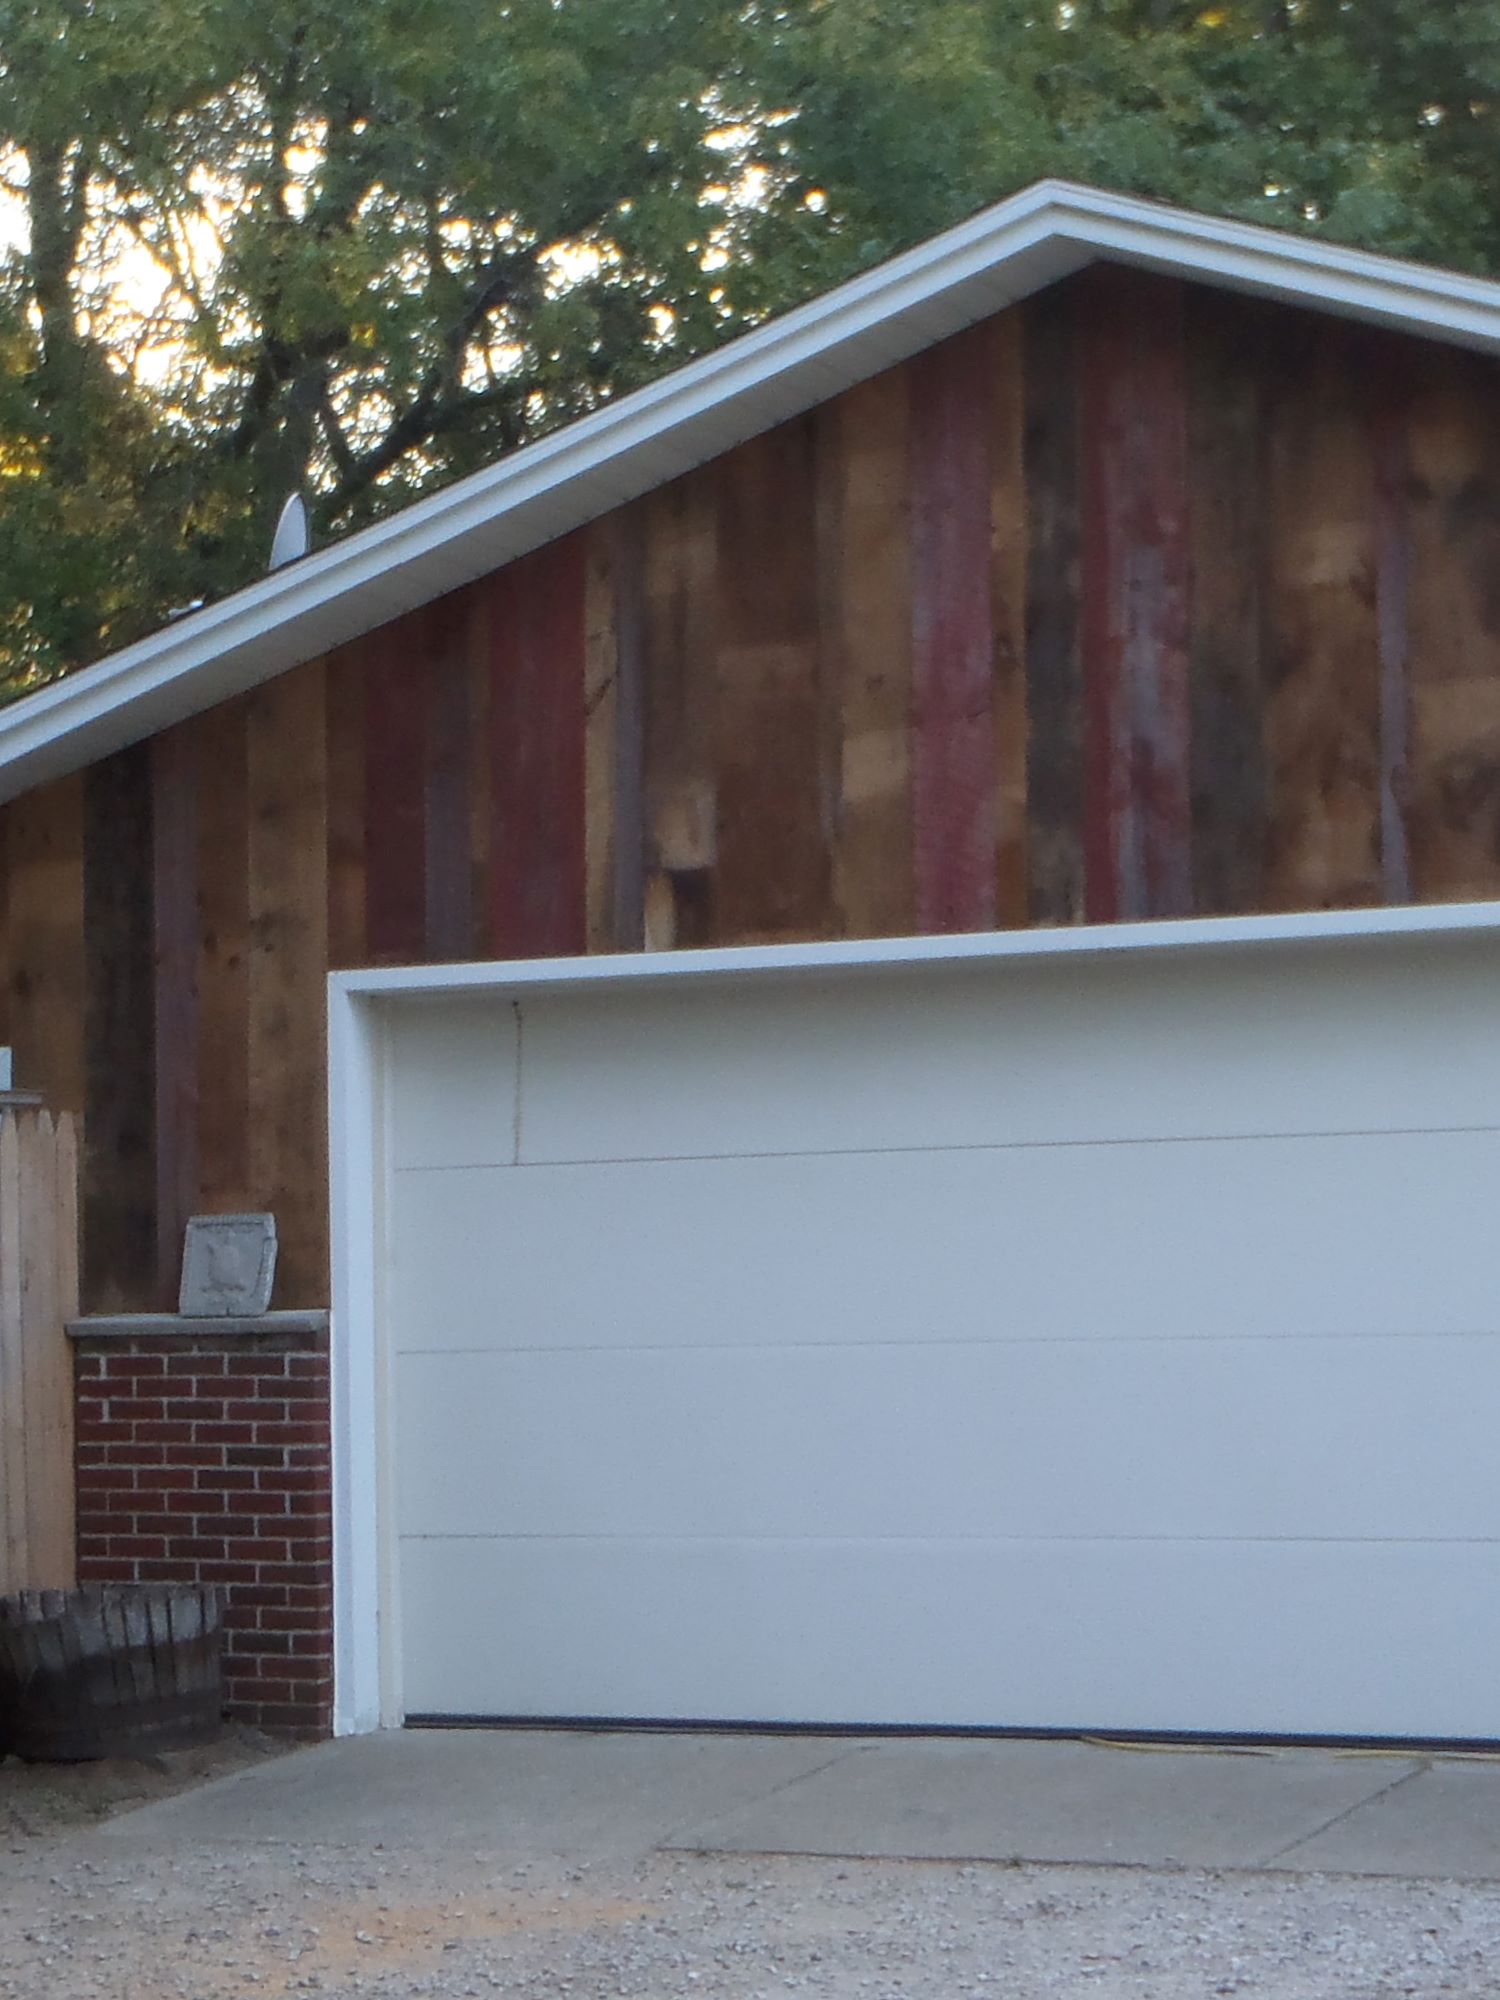 Reclaimed wood siding on the garage of a house